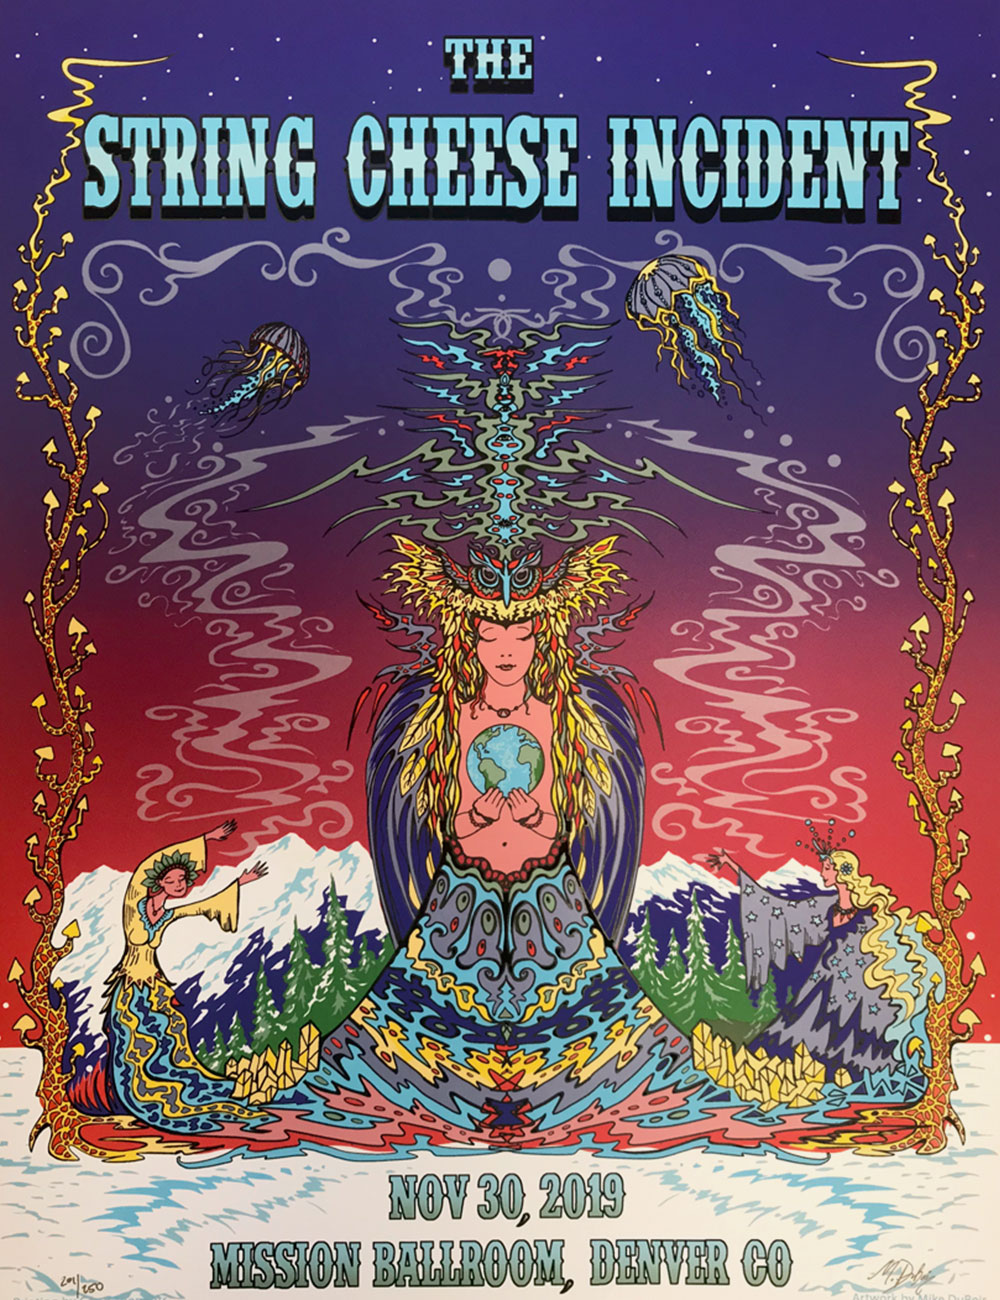 The String Cheese Incident - Merch - Poster - 2019 Mission Ballroom - Denver - November 30th - Detail